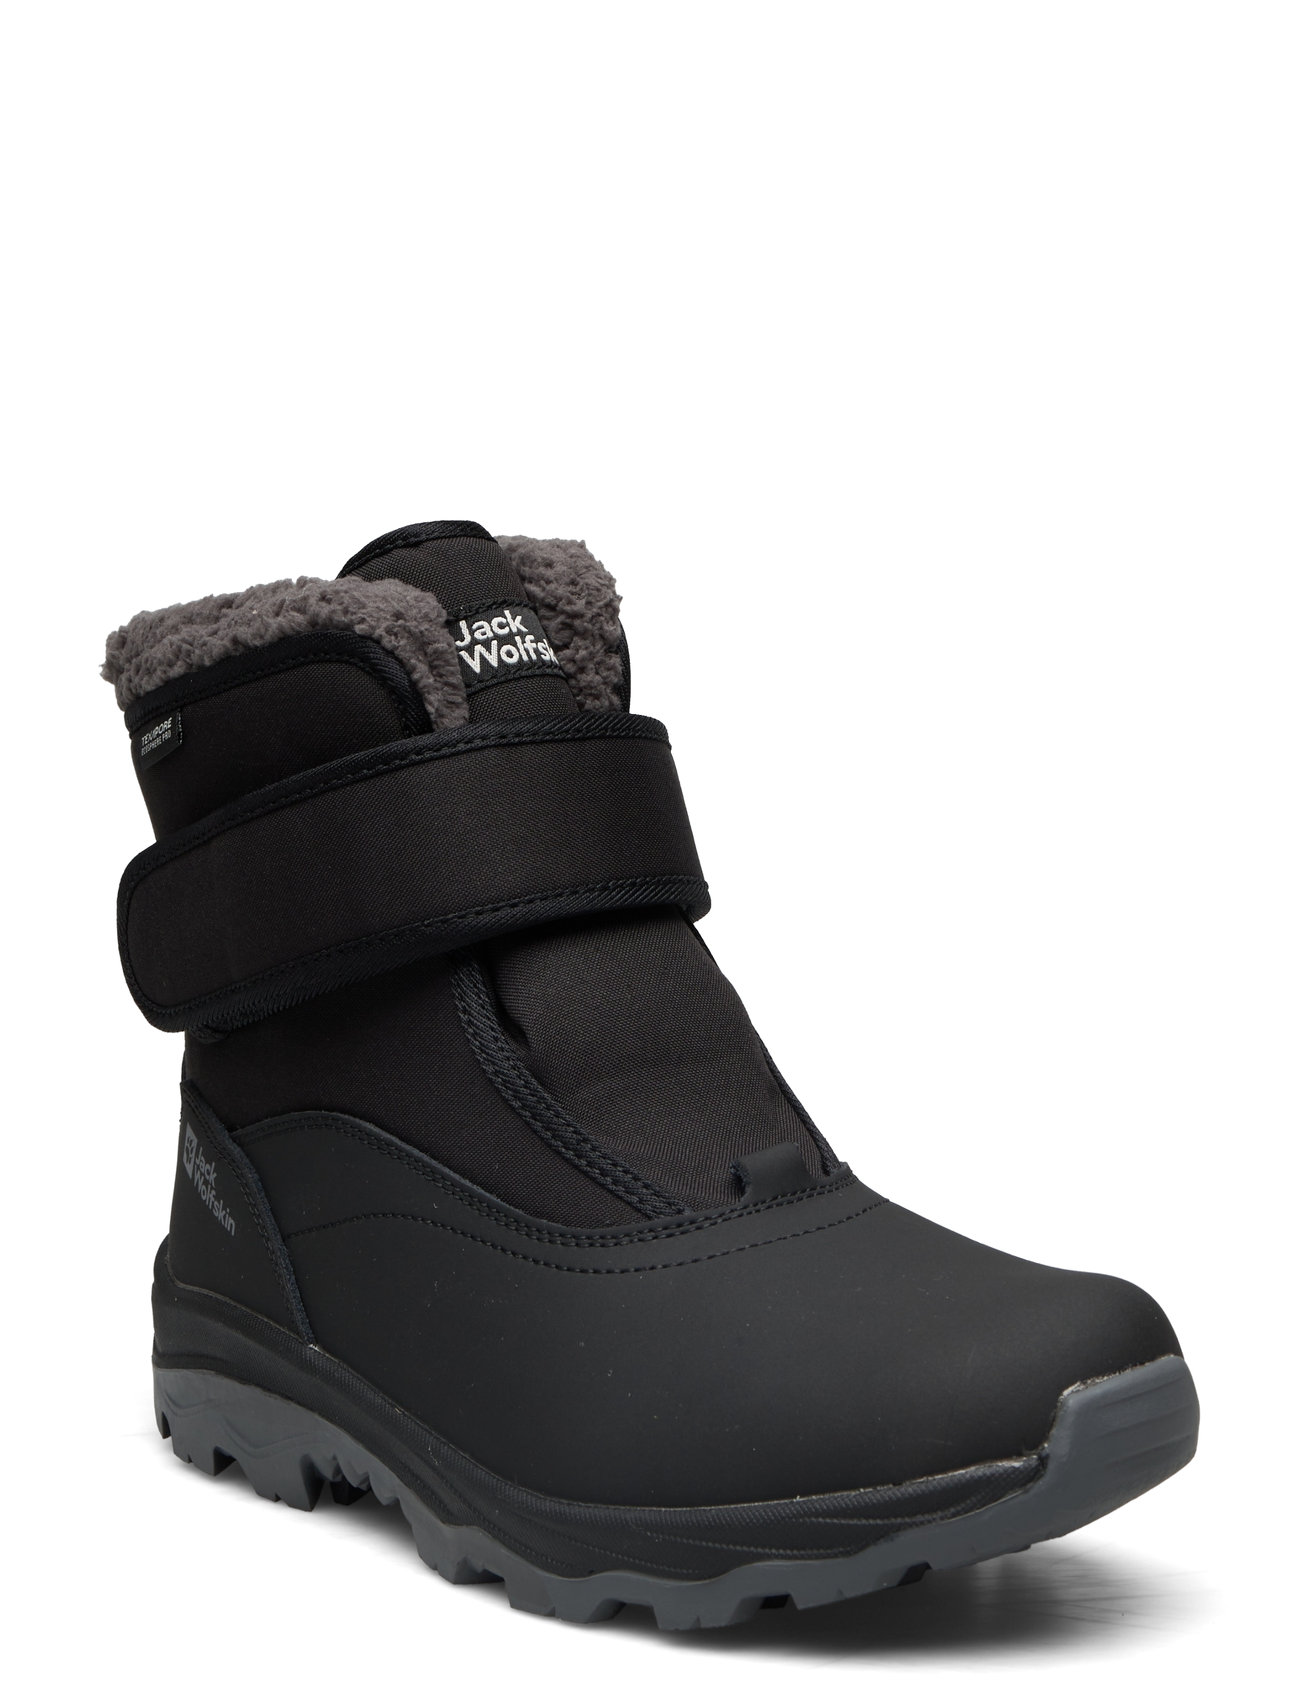 Jack Wolfskin Vojo Shell Texapore Boots K Vc - Mid